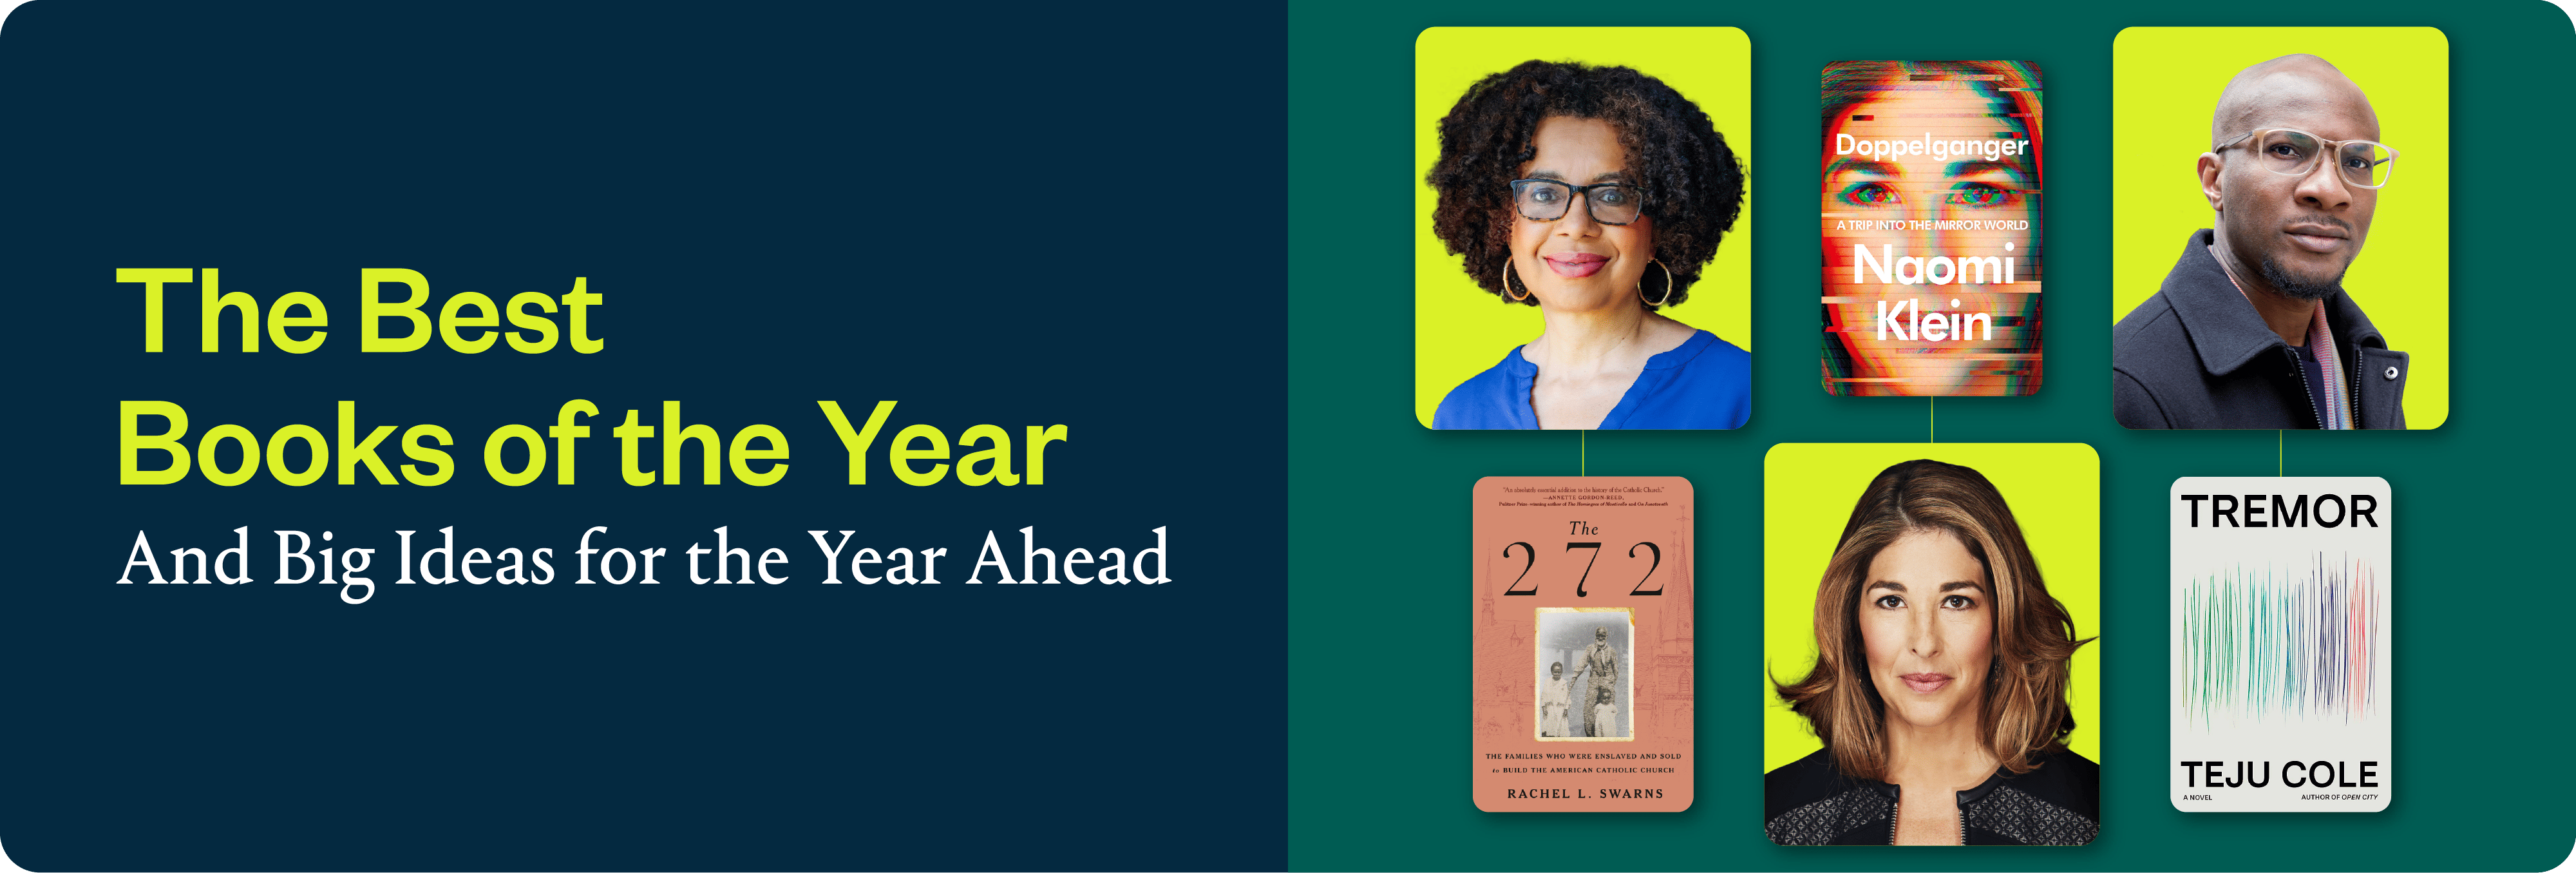 The 7 Best Books of the Year (and the Biggest Ideas for Next Year): Our Speakers’ Books on the TIME Top 10 and More